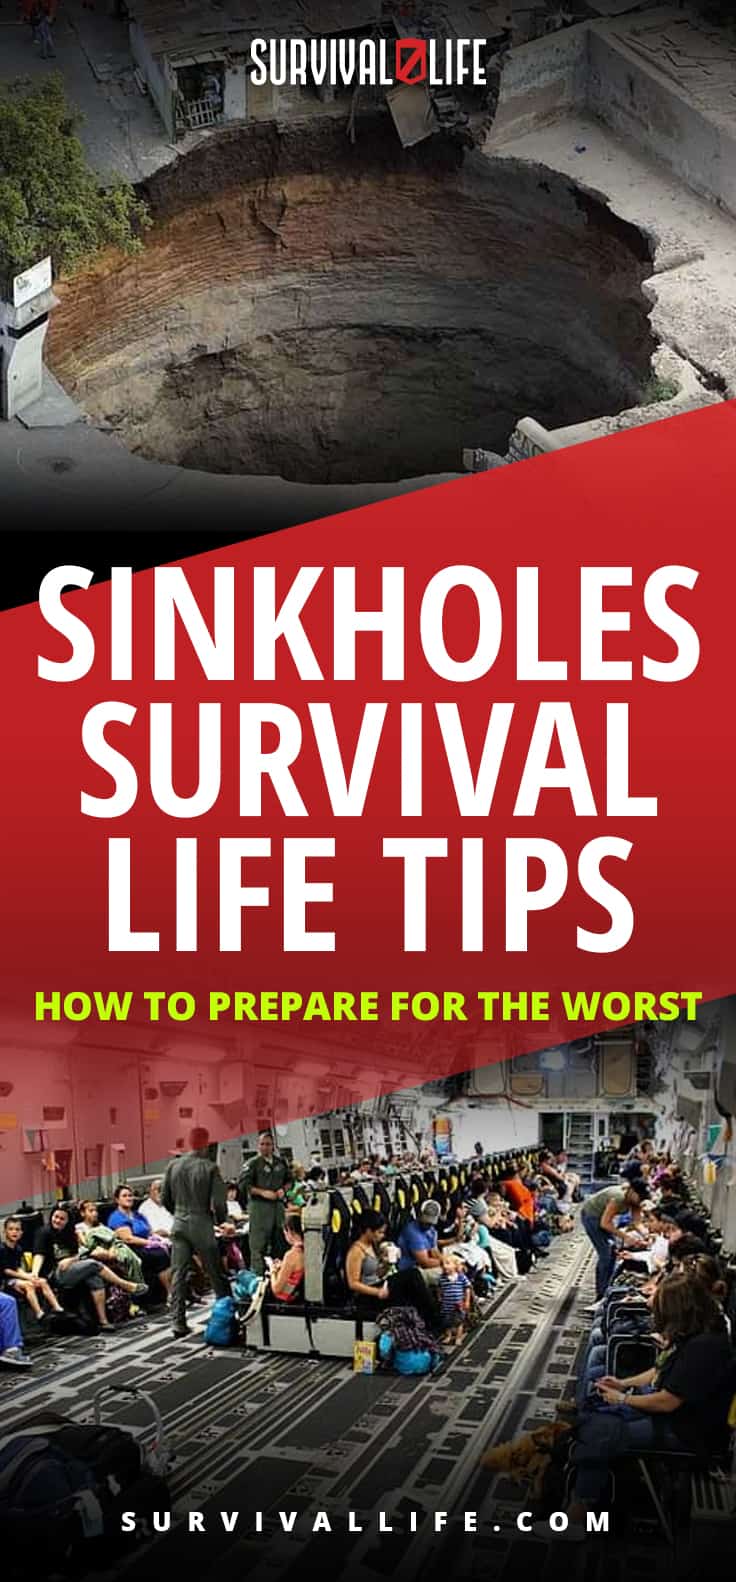 Sinkholes Survival Life Tips | How To Prepare For The Worst